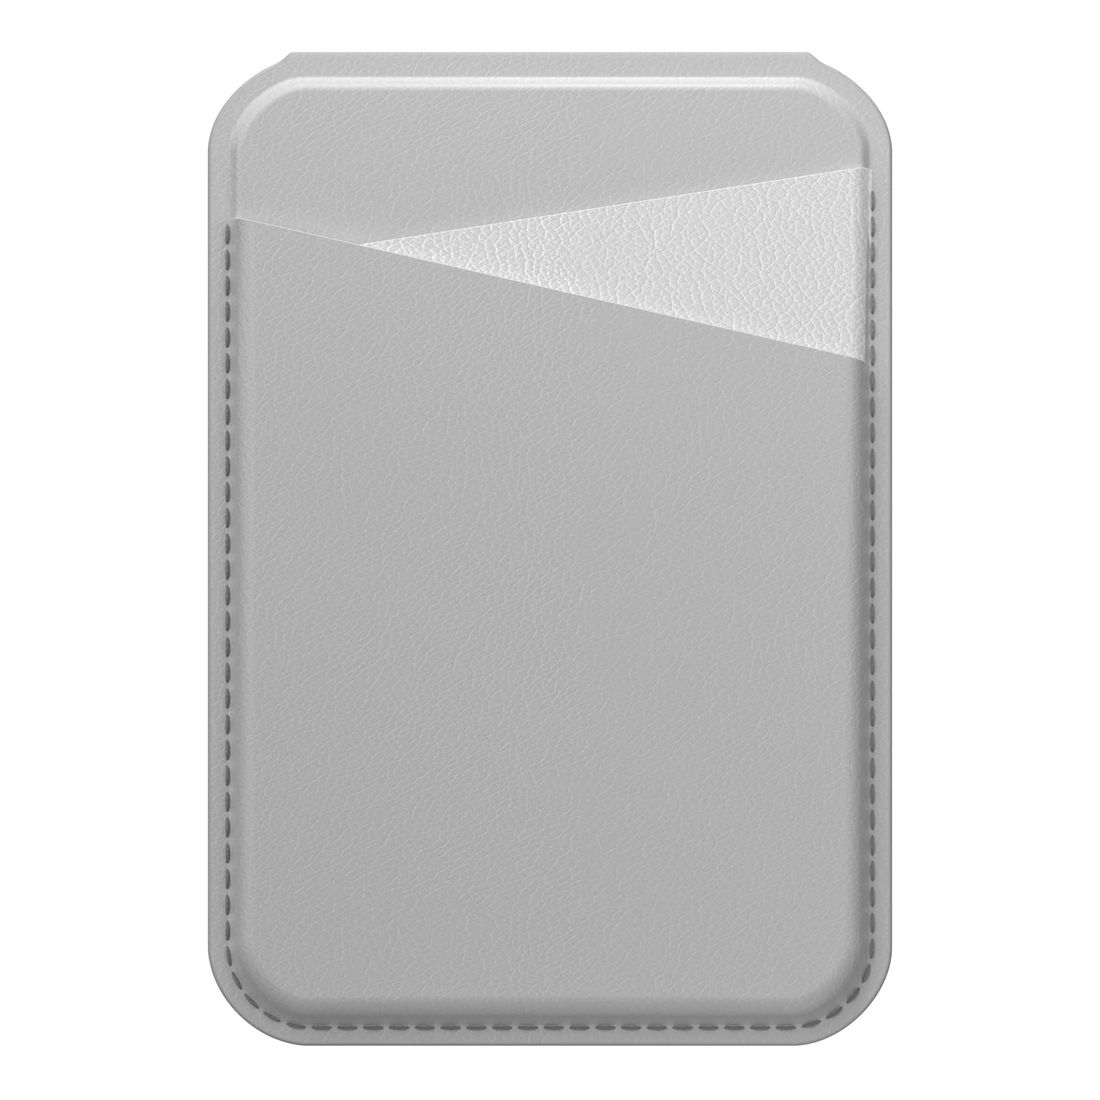 MagEasy Snap Stand Dual-Card Storage Wallet for iPhone - Coral Grey